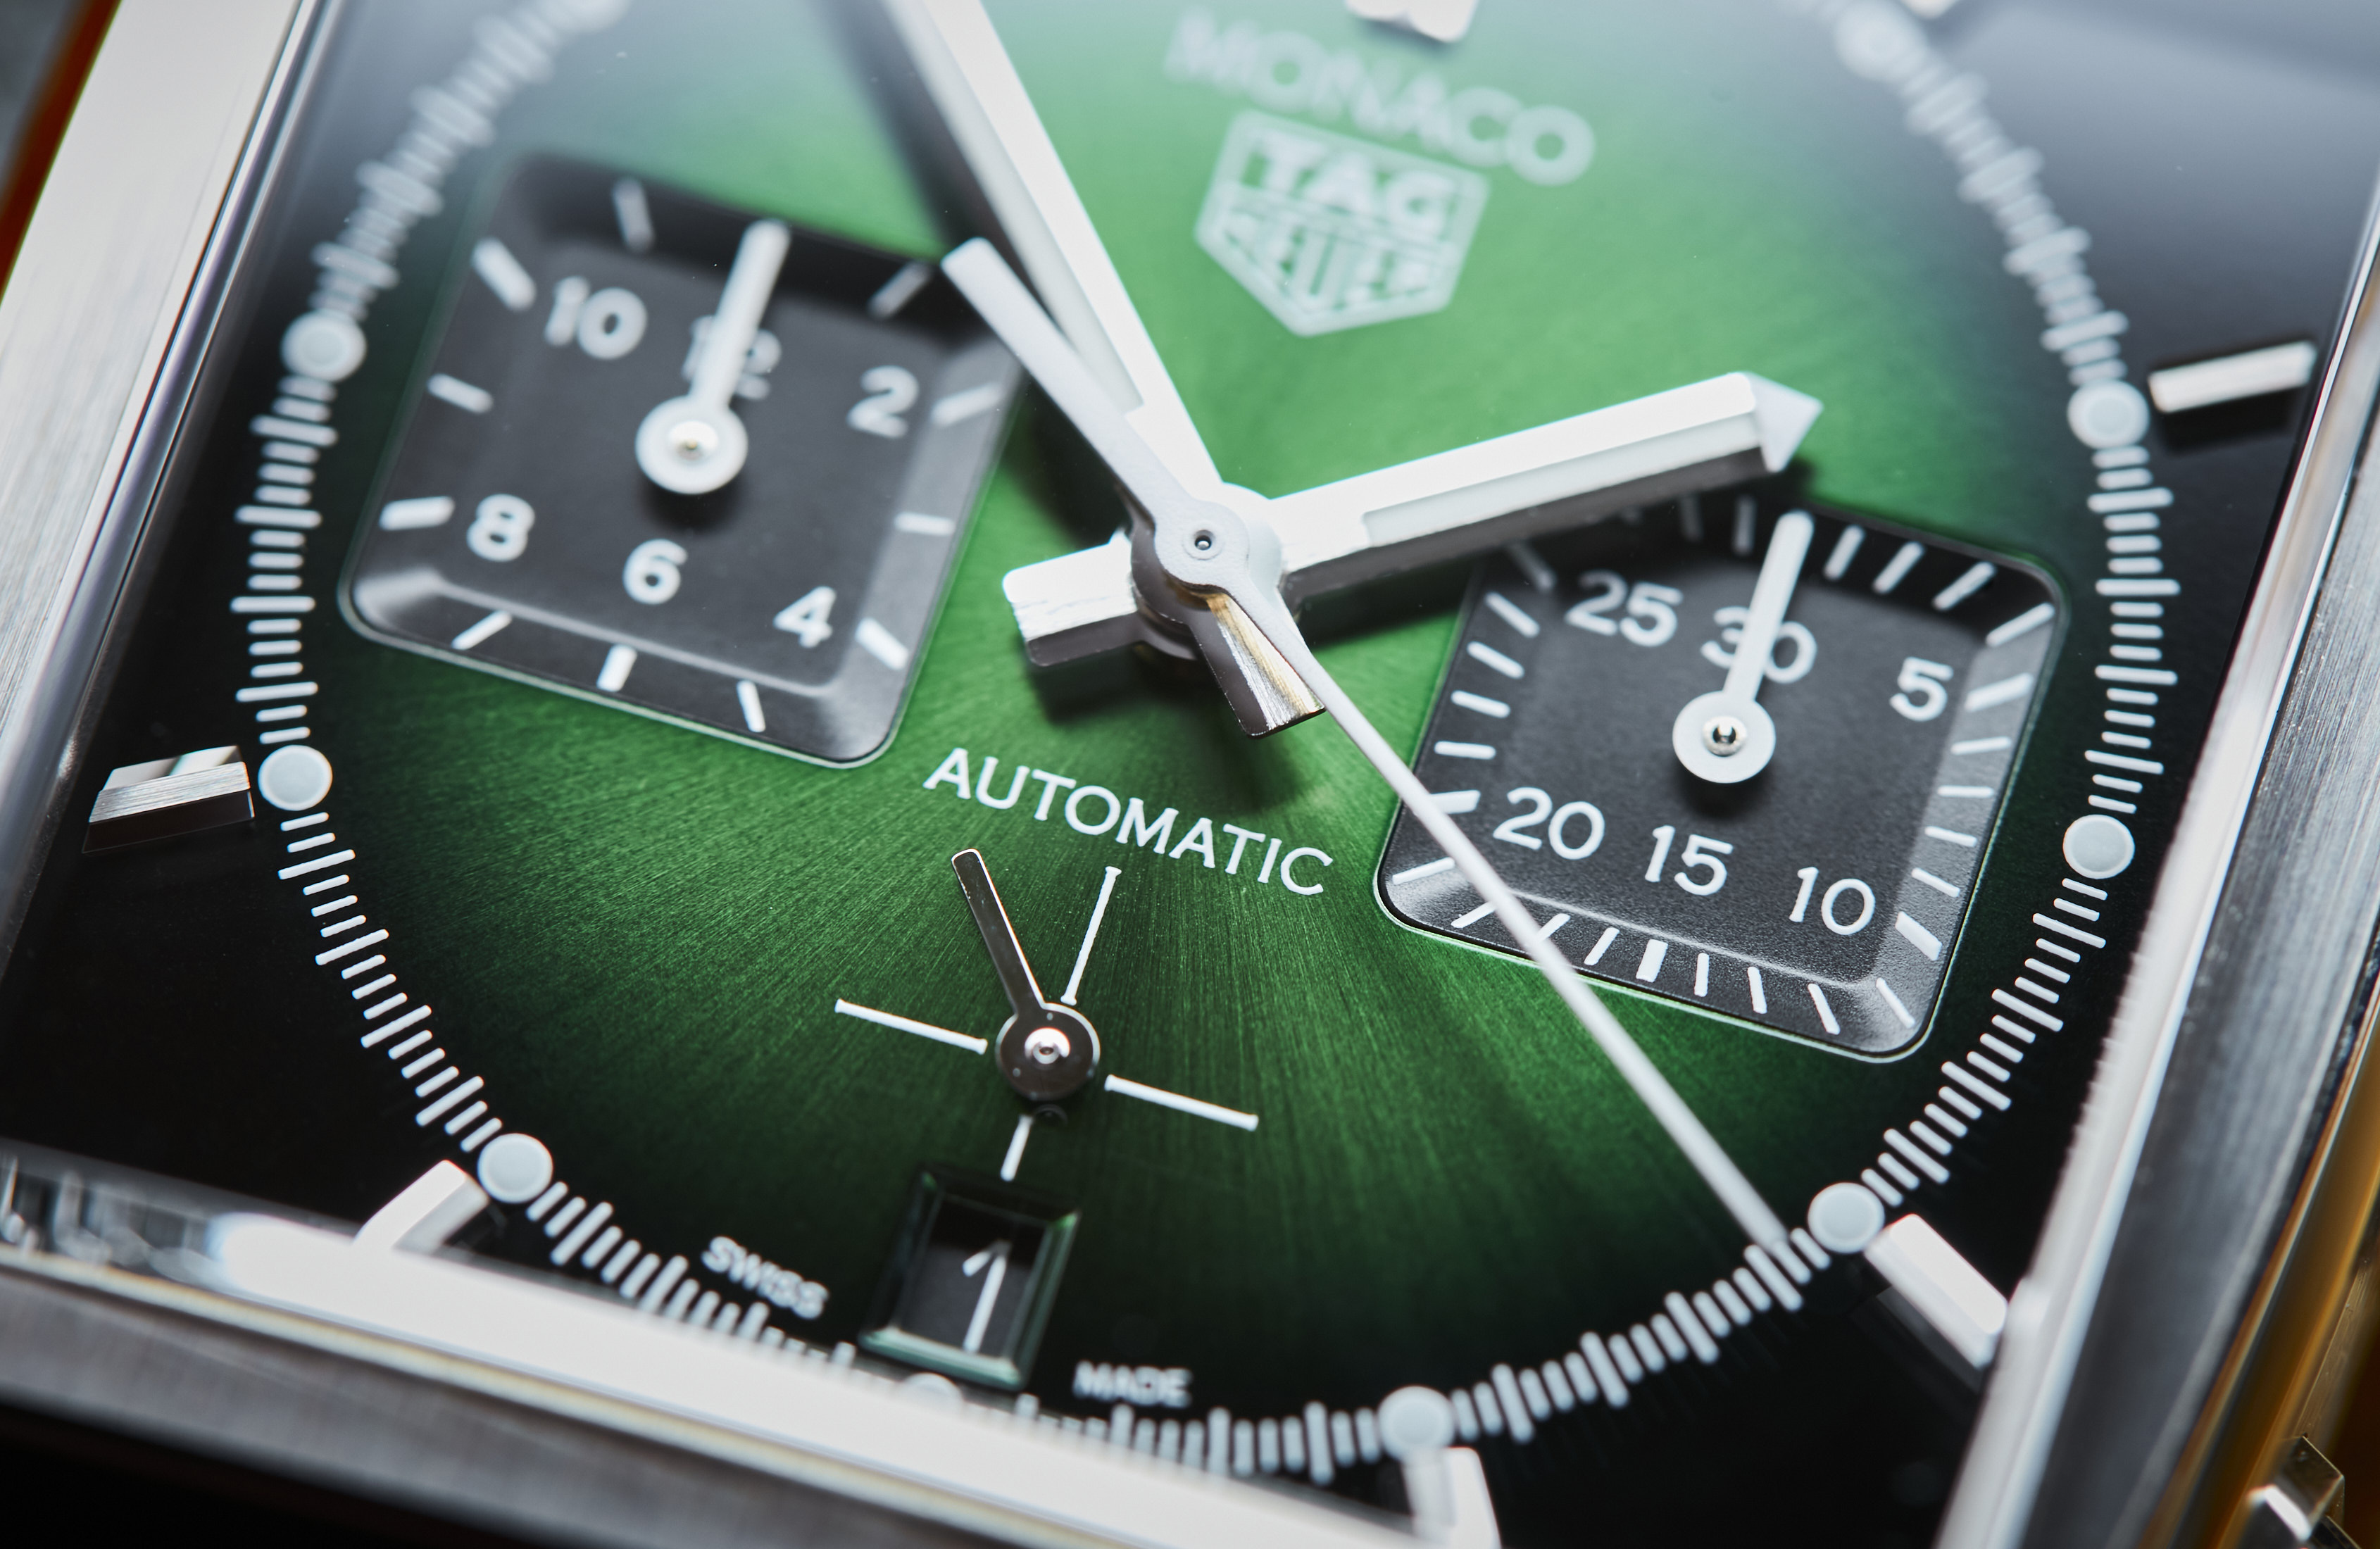 TAG Heuer Monaco Green Limited Edition